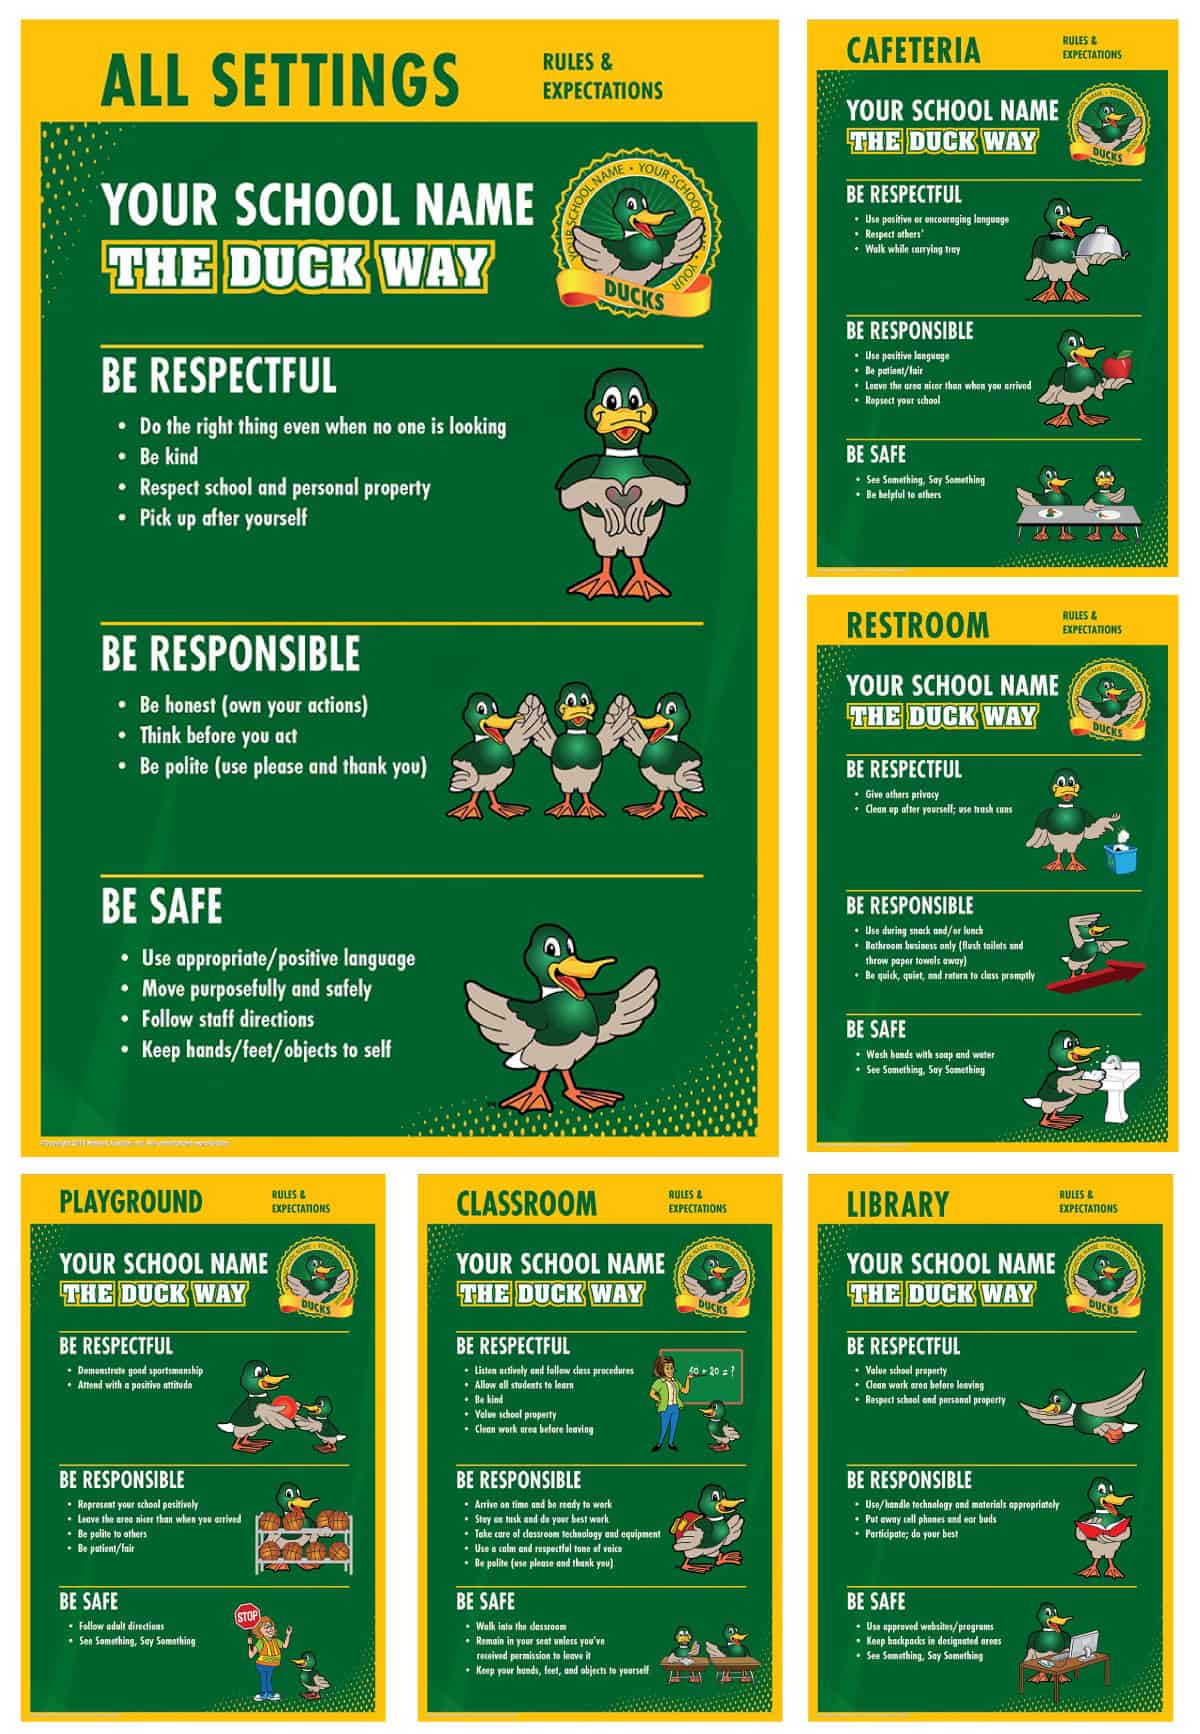 Rules-Poster-duck